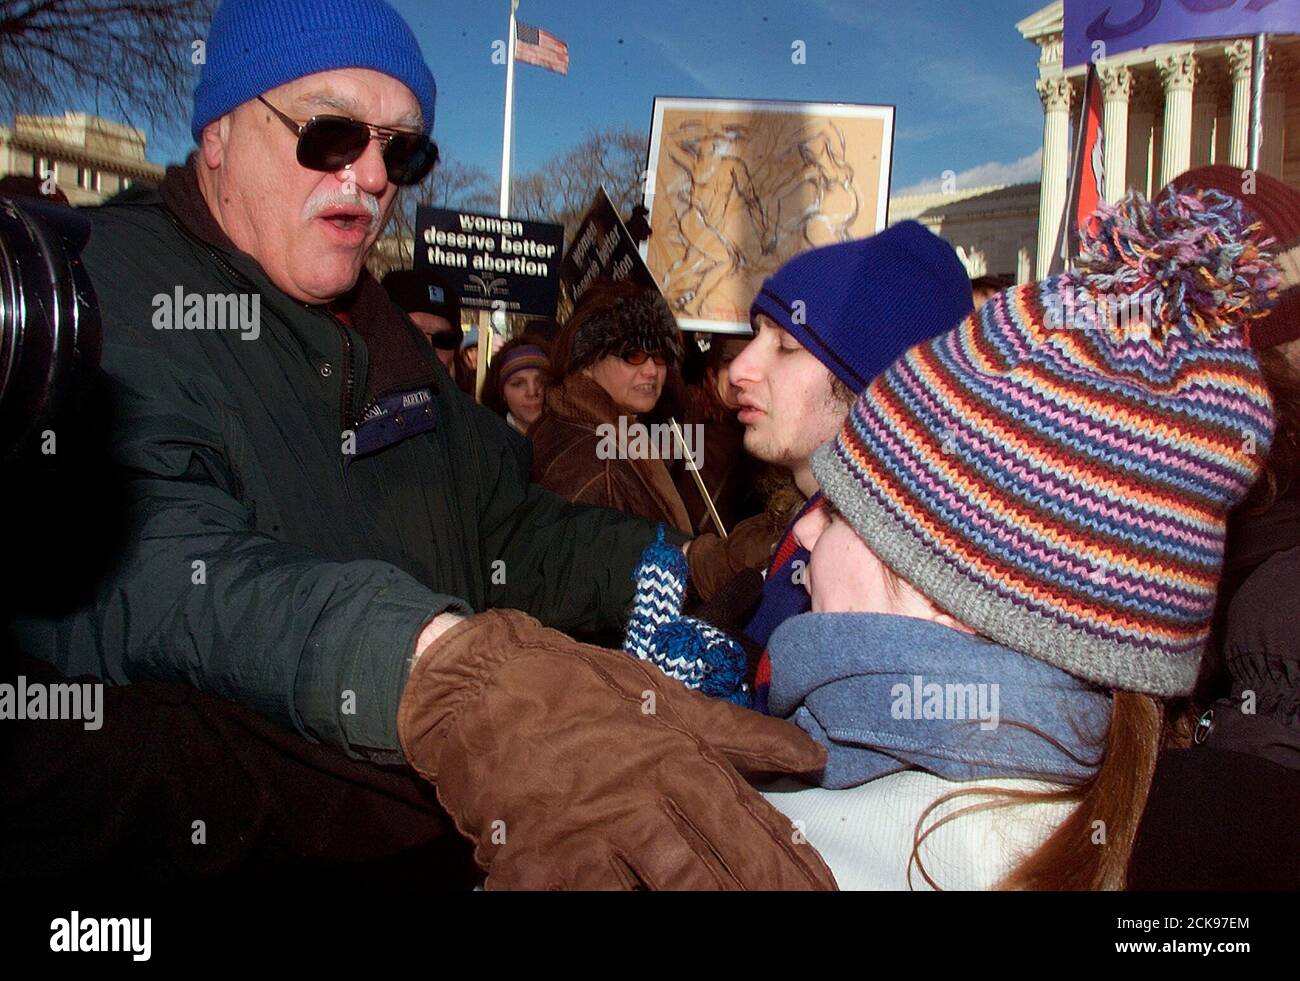 An unidentified anti-abortion demonstrator (L) shoves Amy Savarese, an American University student, of Harrisburg, PA. during a demonstration in front of the U.S. Supreme Court in Washington January 22, 2003. Activists on both sides of the abortion debate rallied on Wednesday to mark the 30th anniversary of the U.S. Supreme Court ruling legalizing abortion. Three decades after the high court decision on Roe v. Wade, abortion rights supporters worry that the right to terminate pregnancy may be endangered. Republicans hold the White House and majorities in both houses of Congress, with a slim 5- Stock Photo